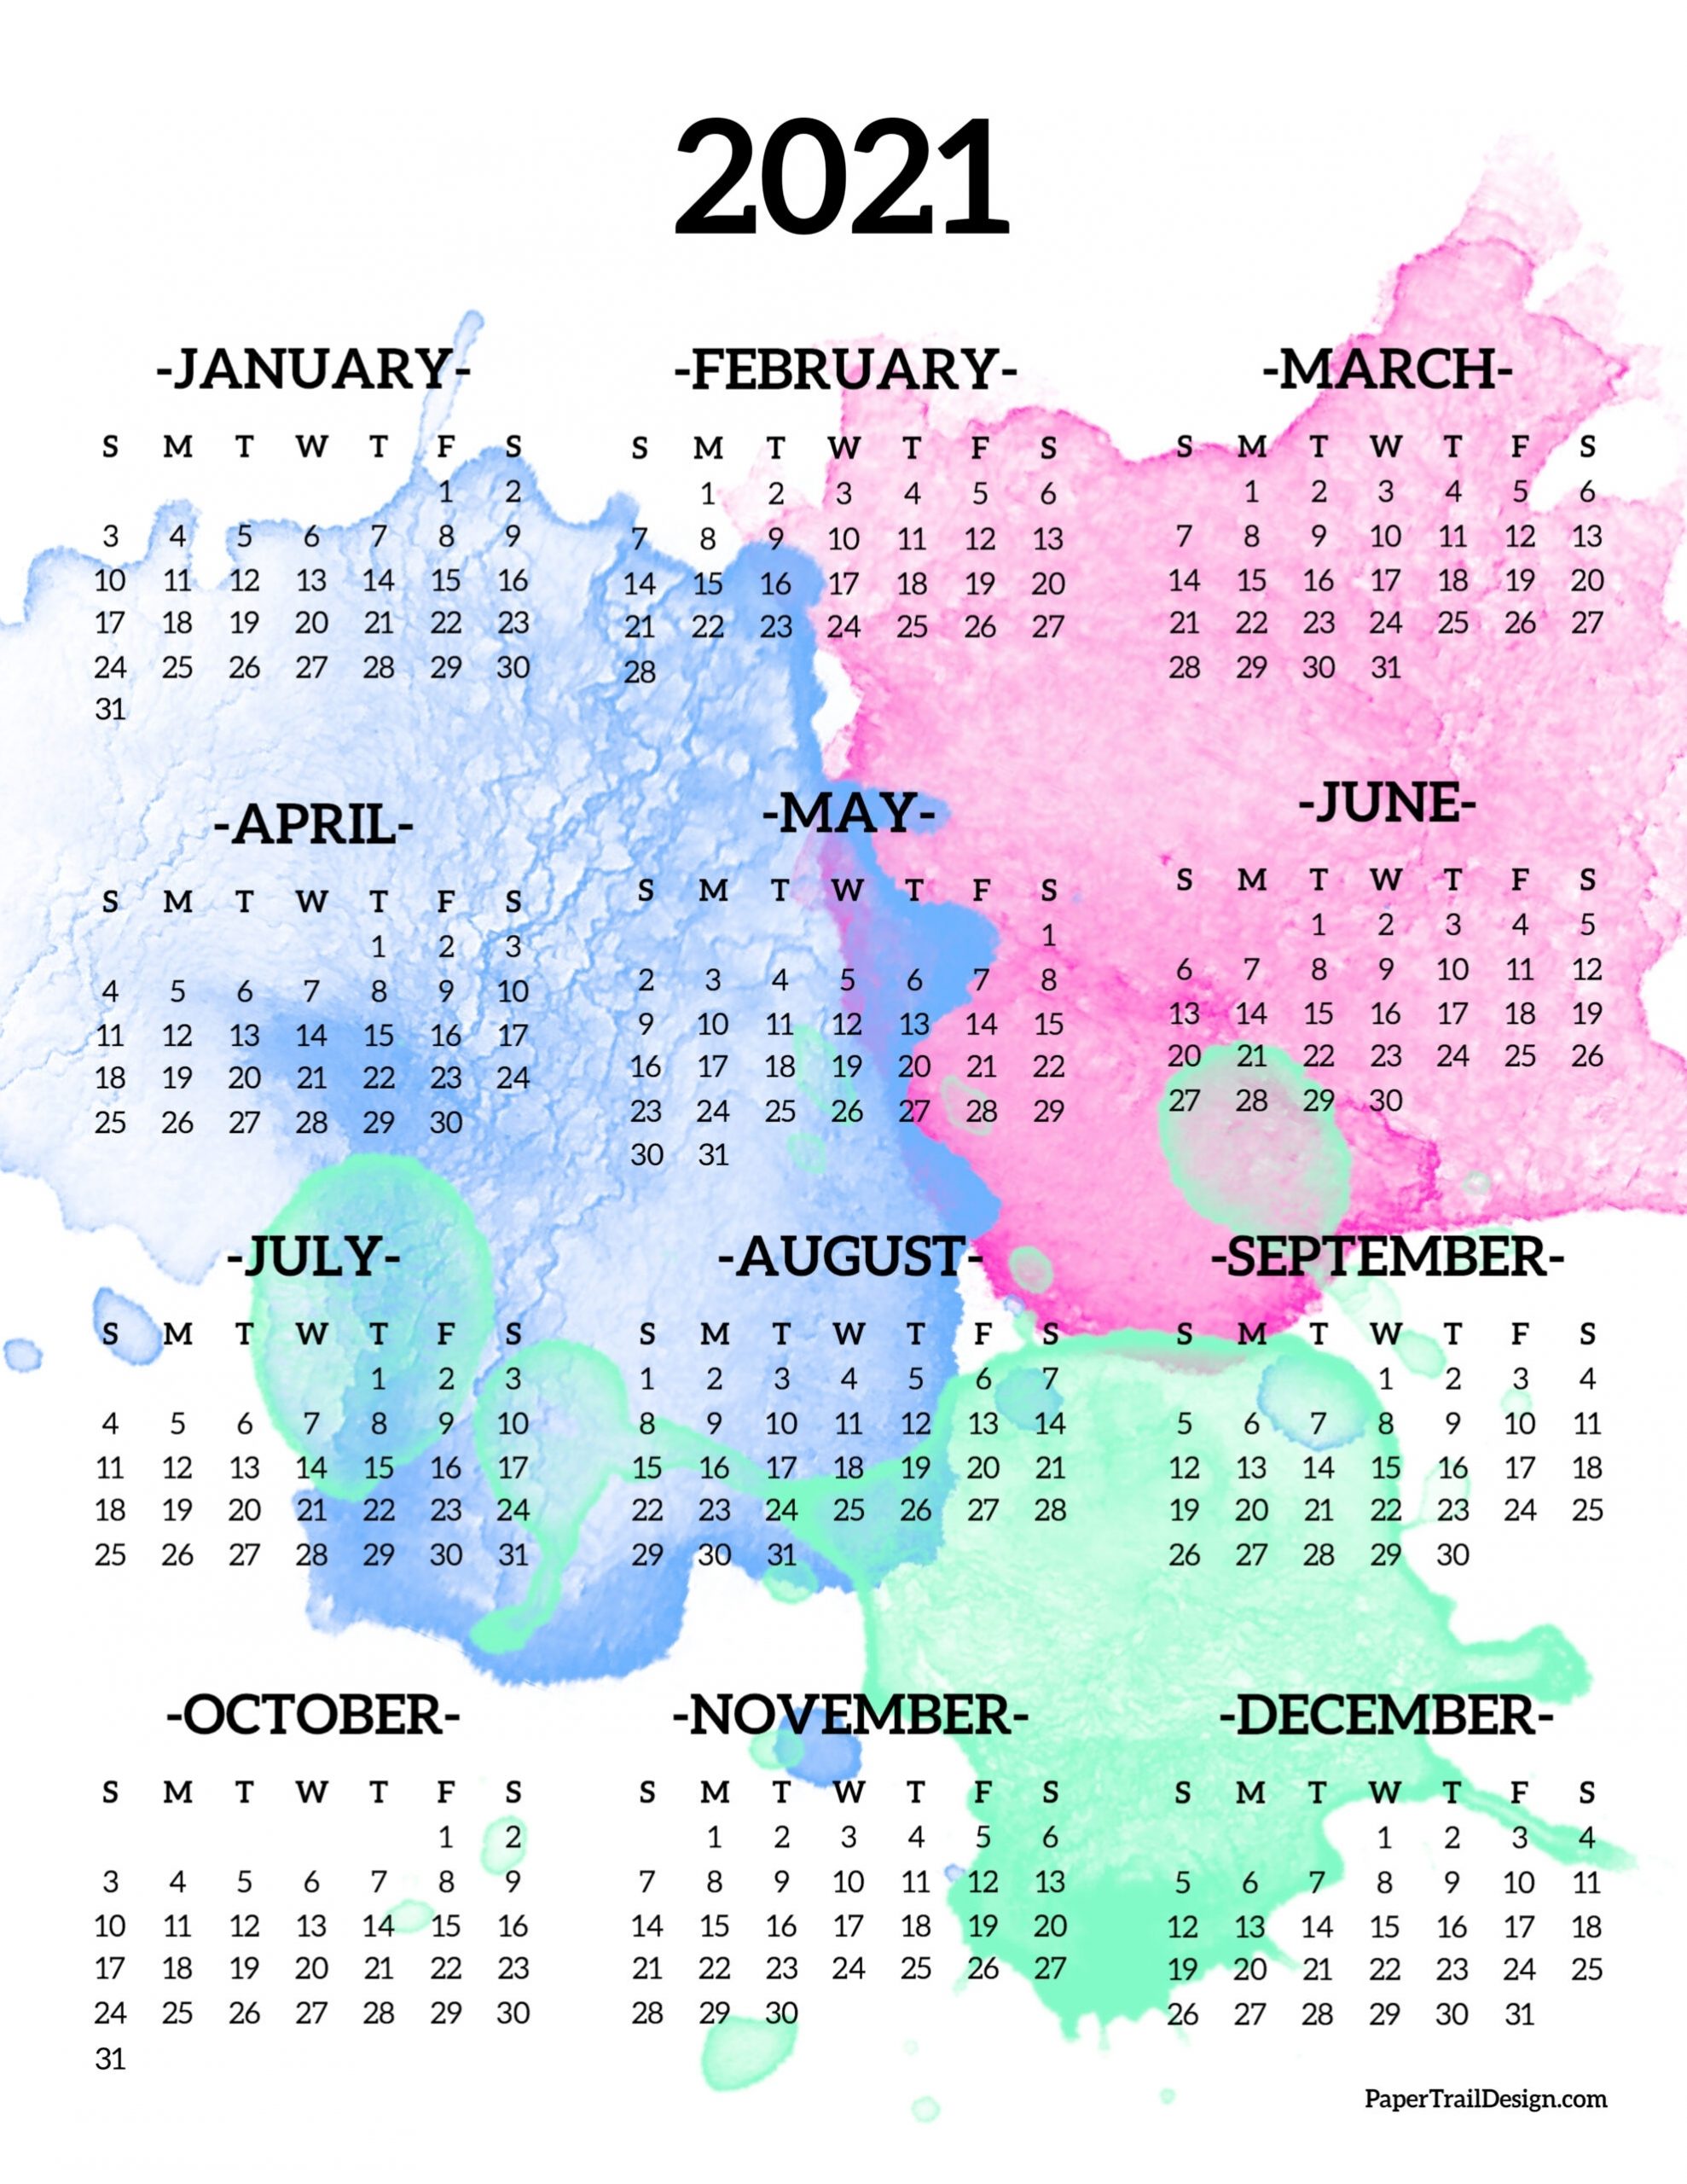 Calendar 2021 Printable One Page | Paper Trail Design